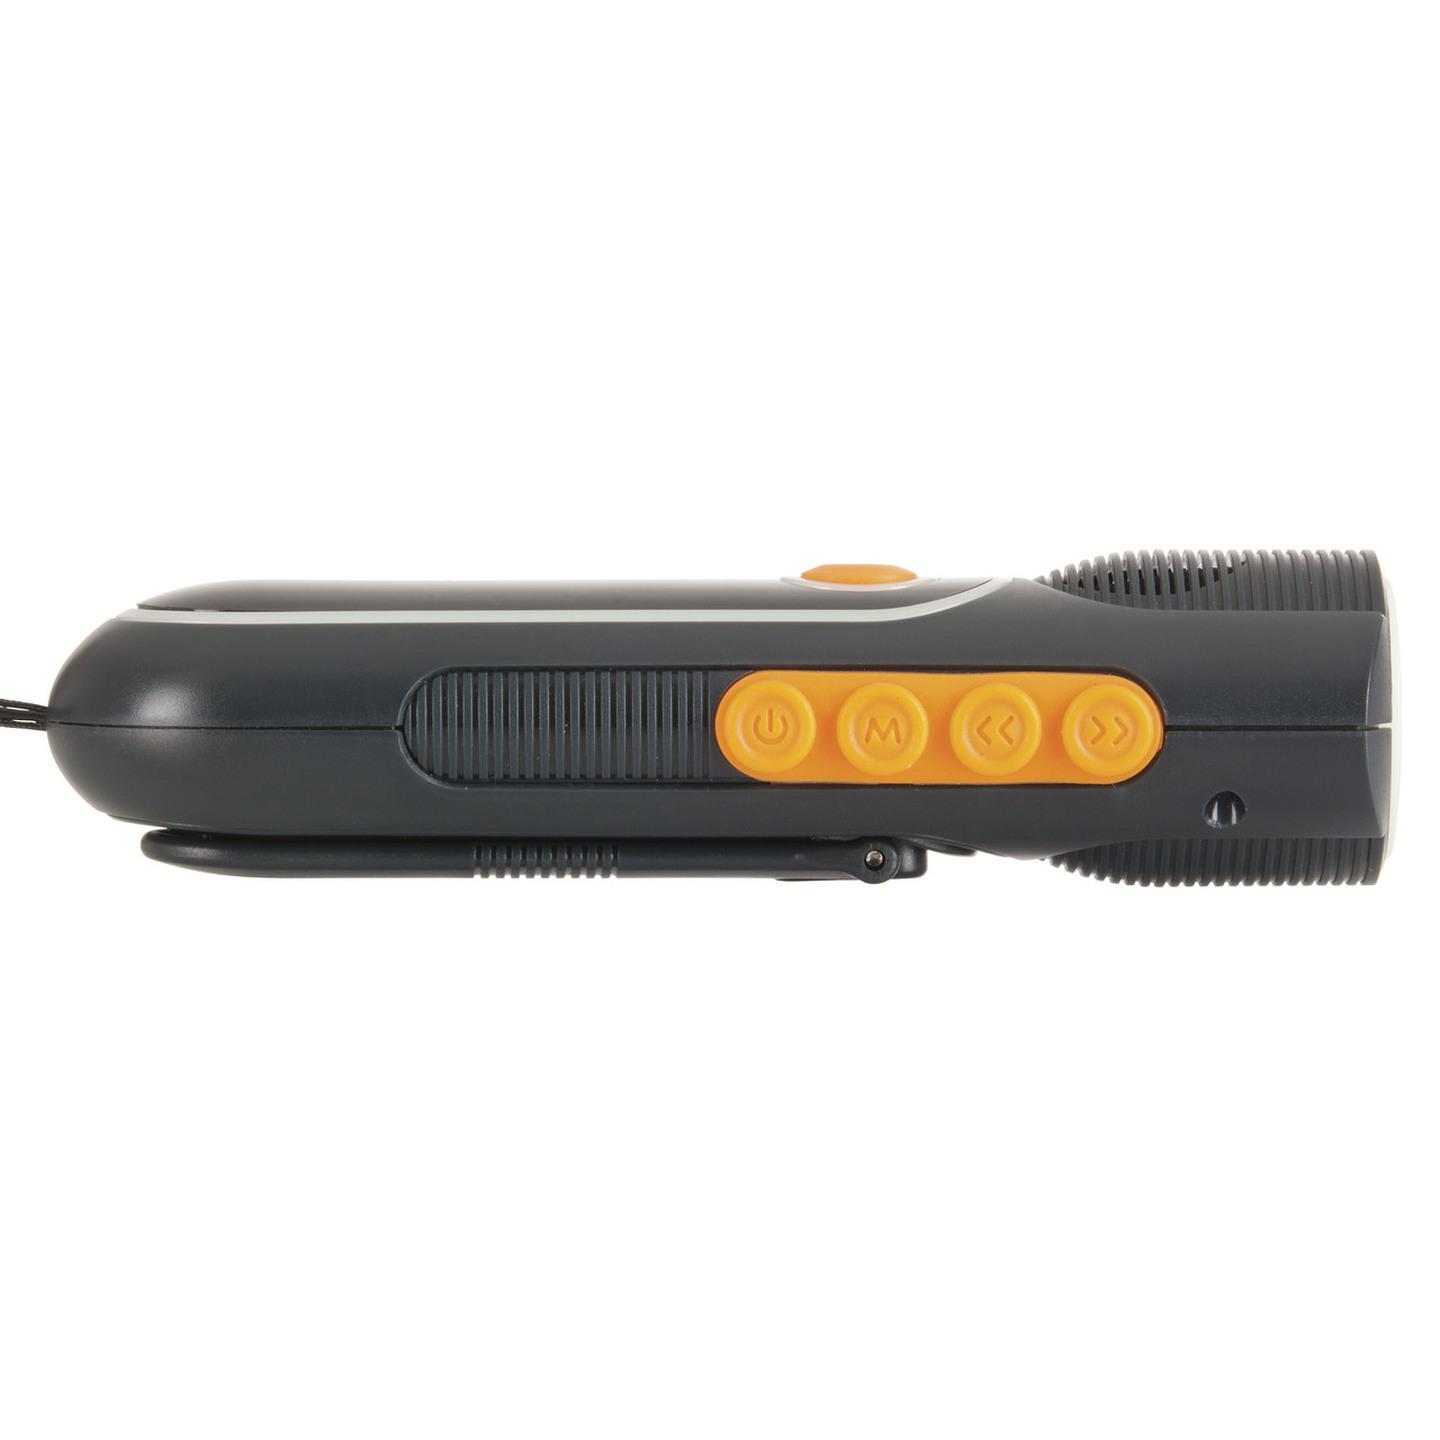 3 LED Torch with AM/FM Radio & Dynamo Charger